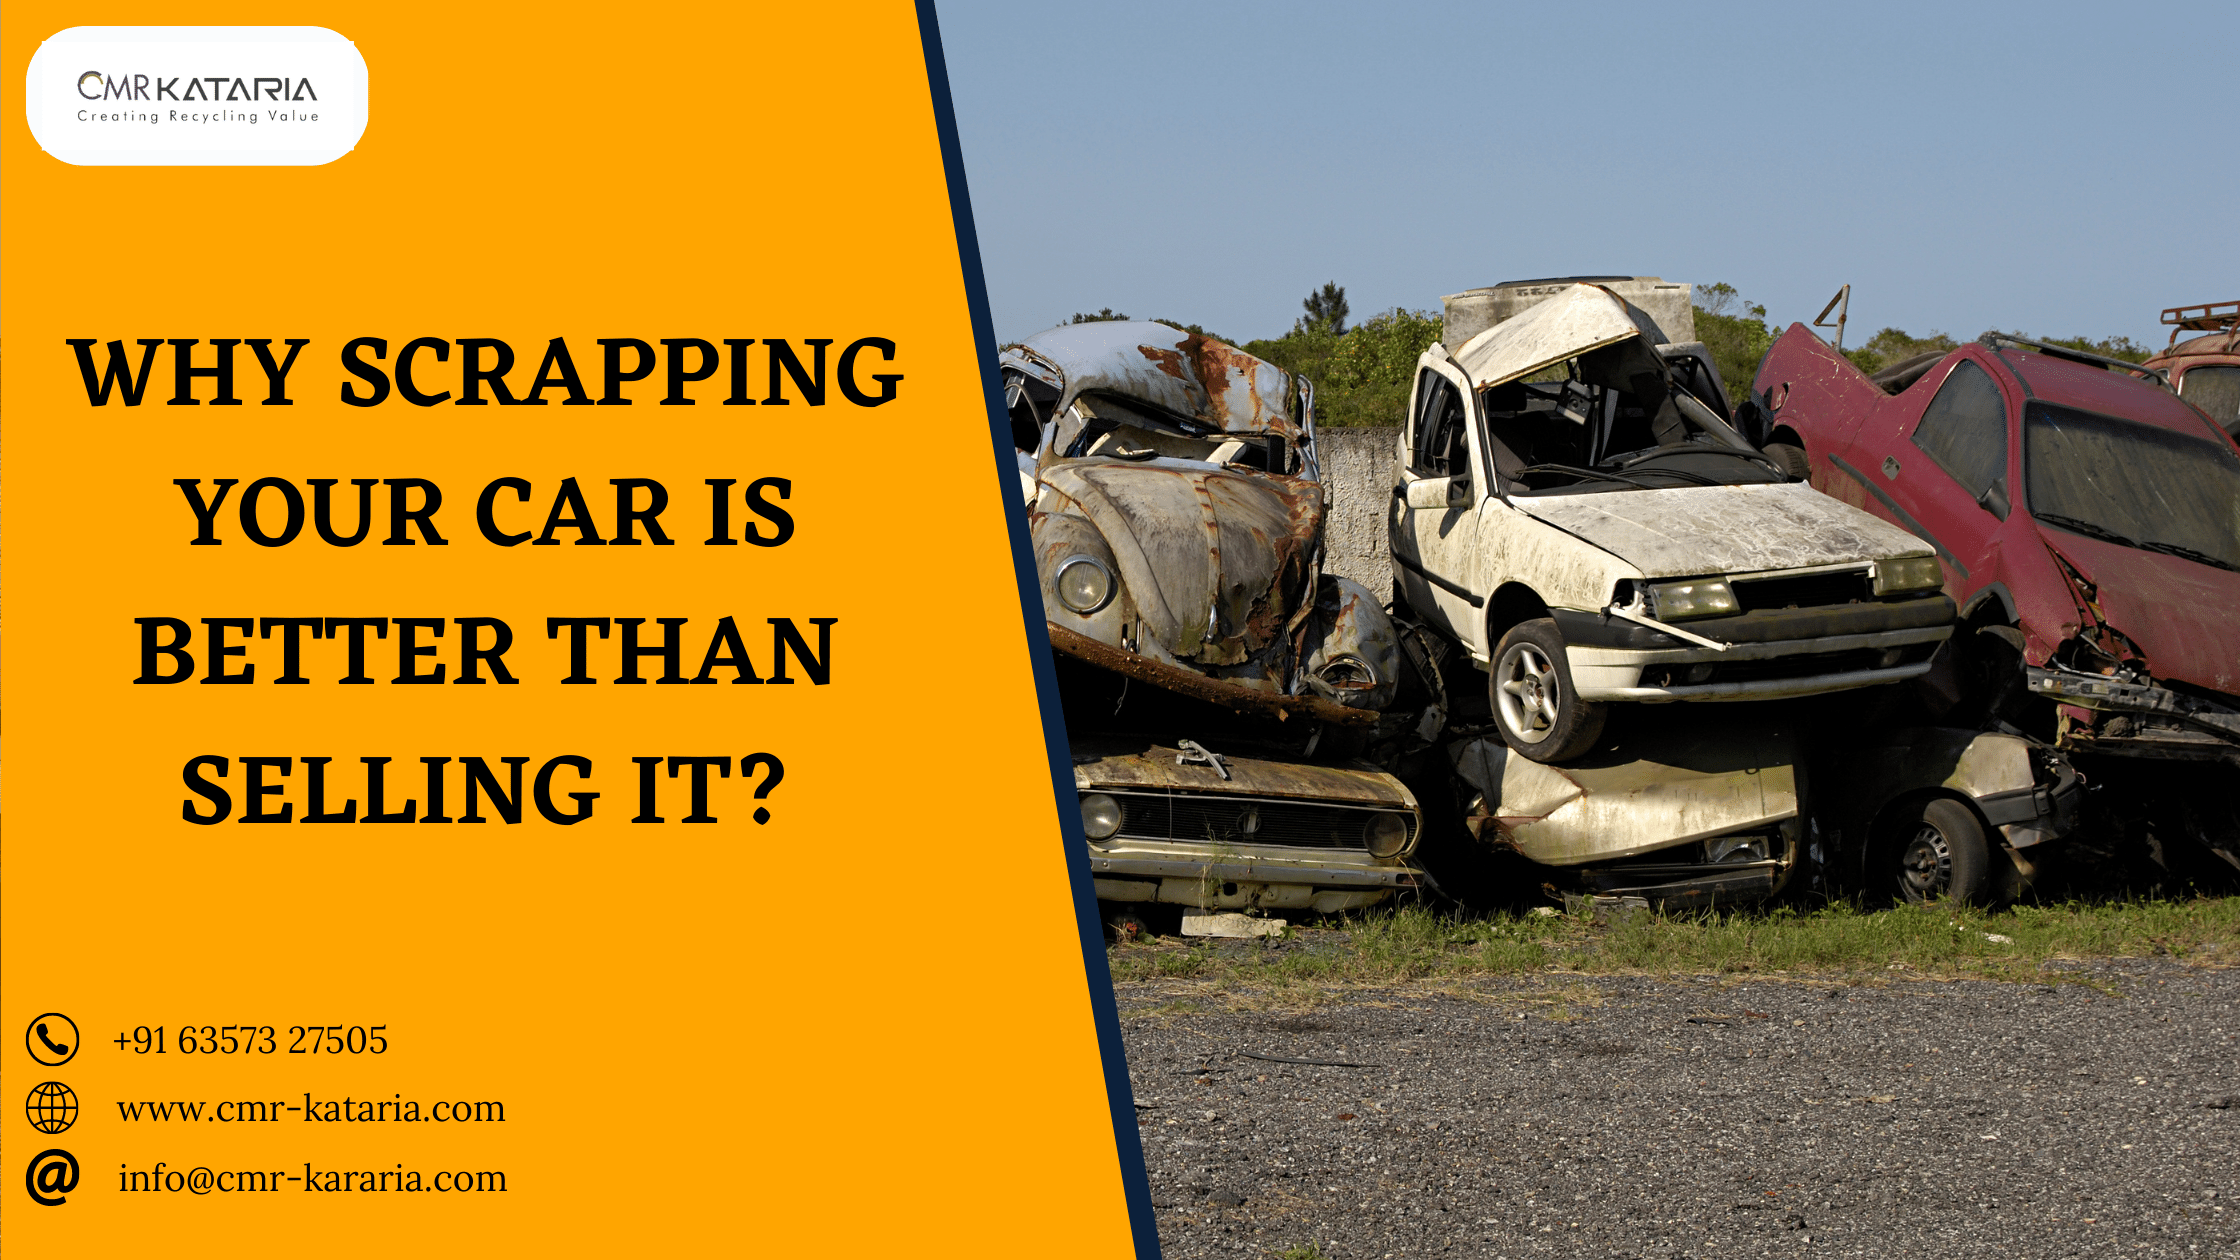 Why Scrapping Your Car is Better Than Selling It?